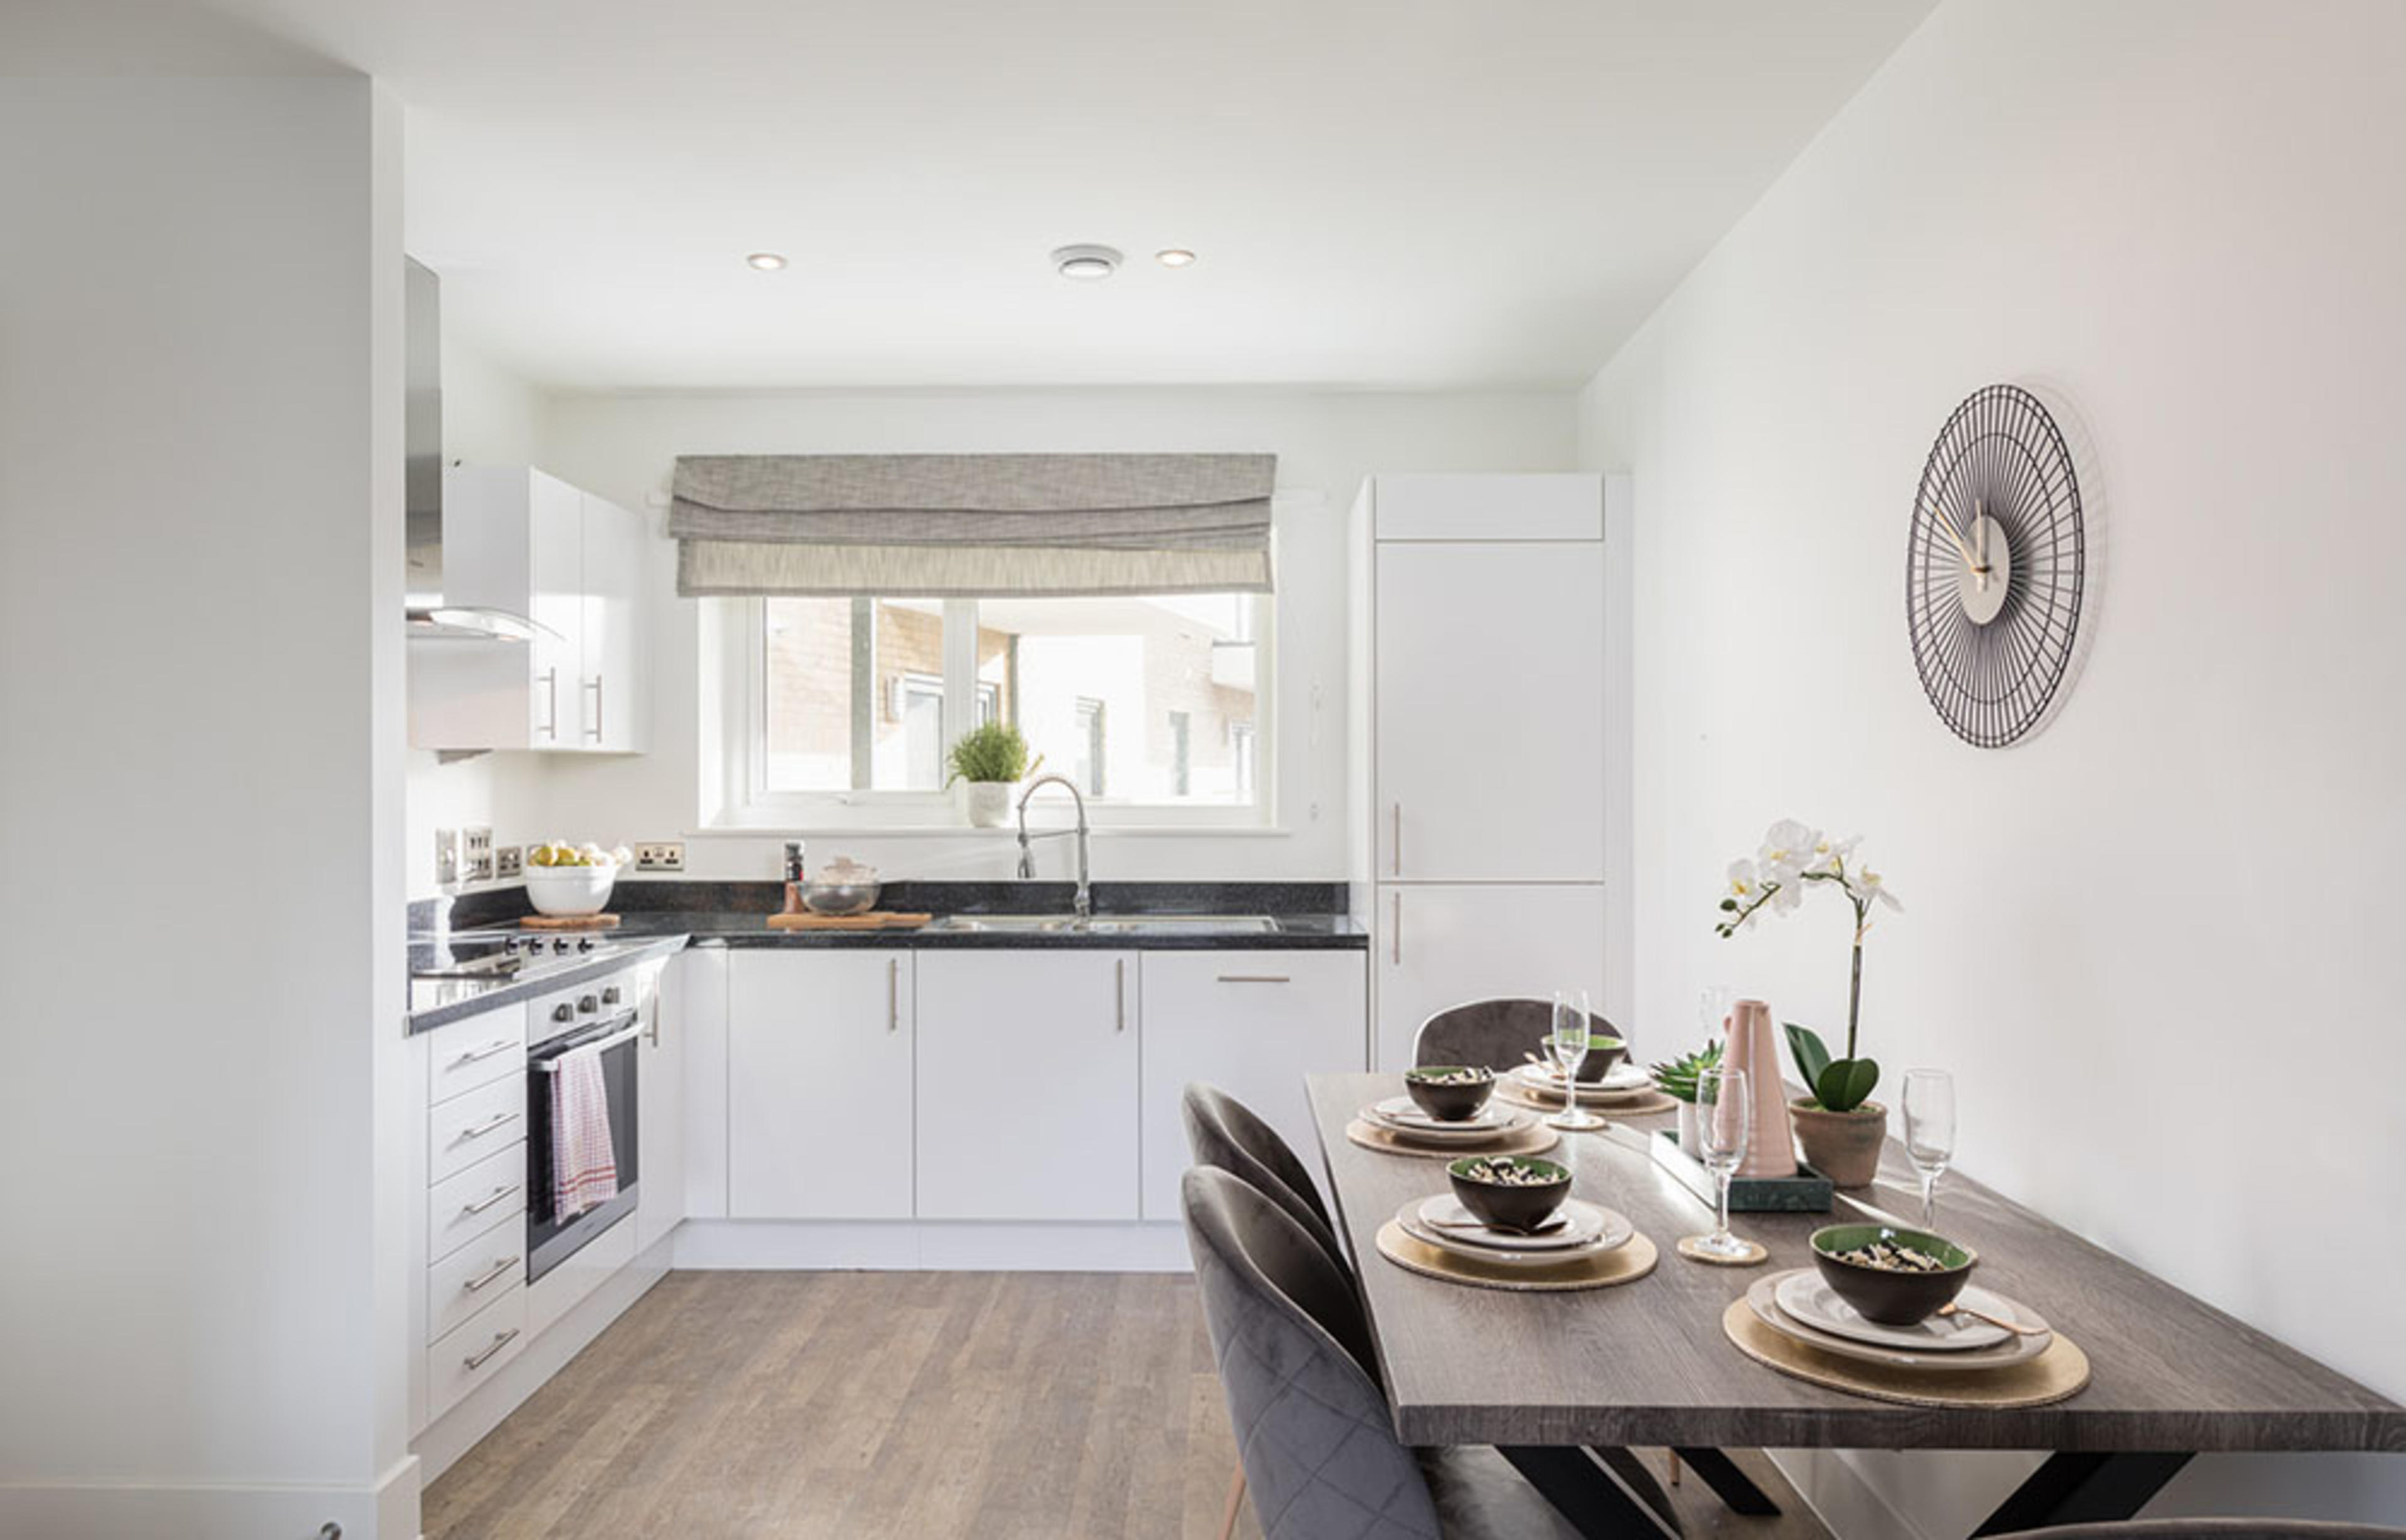 An L-shaped kitchen with white cabinets, dark worktops and up-stands and brushed silver appliances. The dining area contains a rectangular stone-effect table set against the wall.